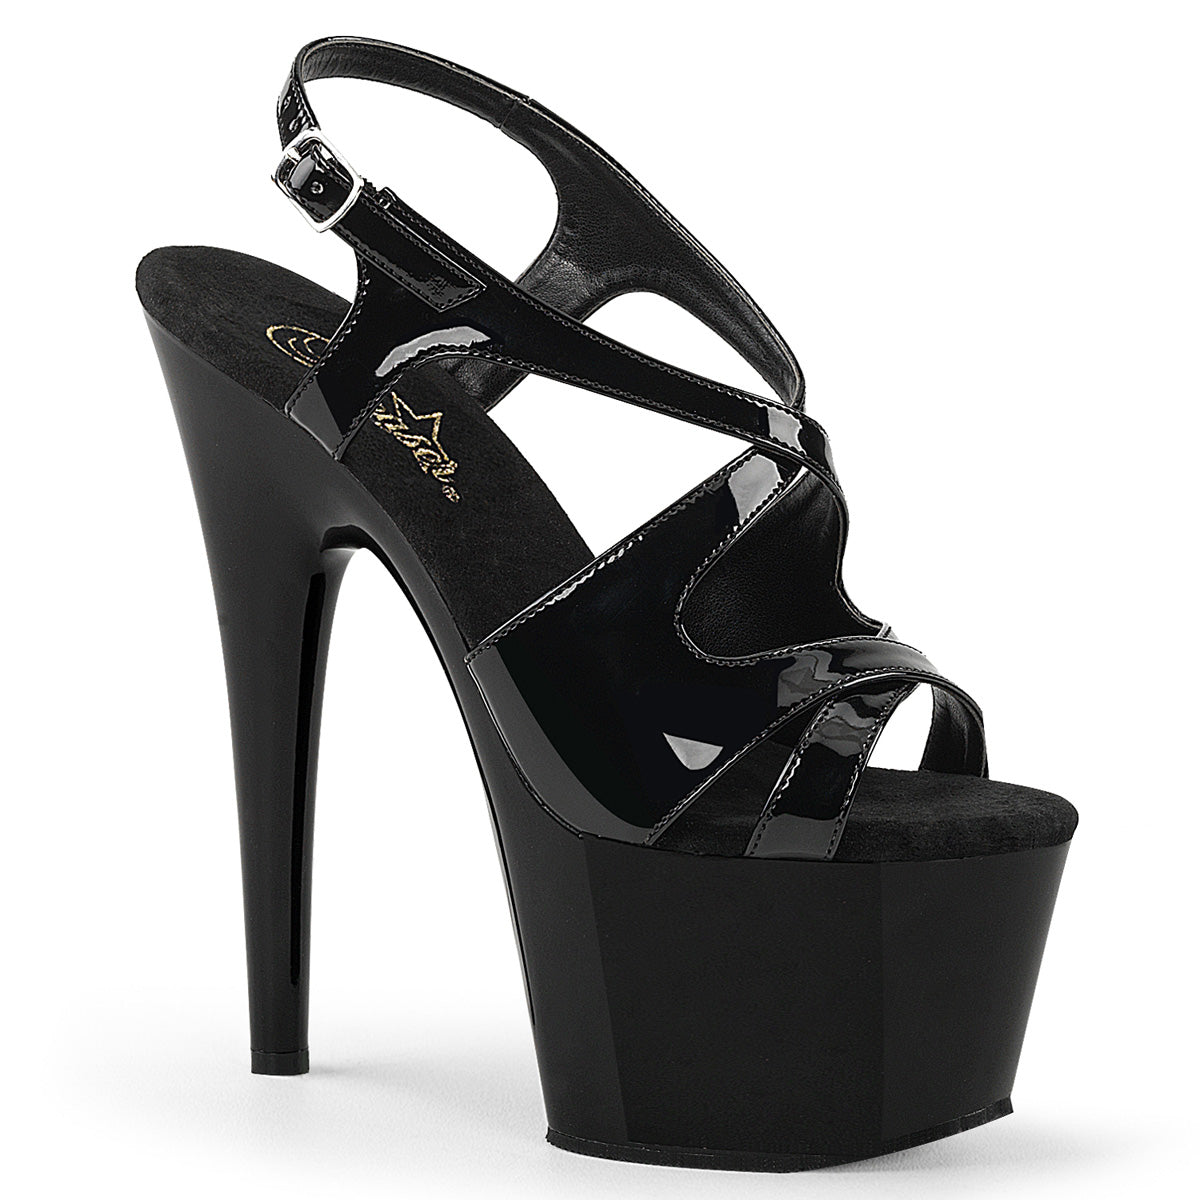 ADORE-730 Pleaser 7 Inch Heel Black Patent Strippers Sandals-Pleaser- Sexy Shoes